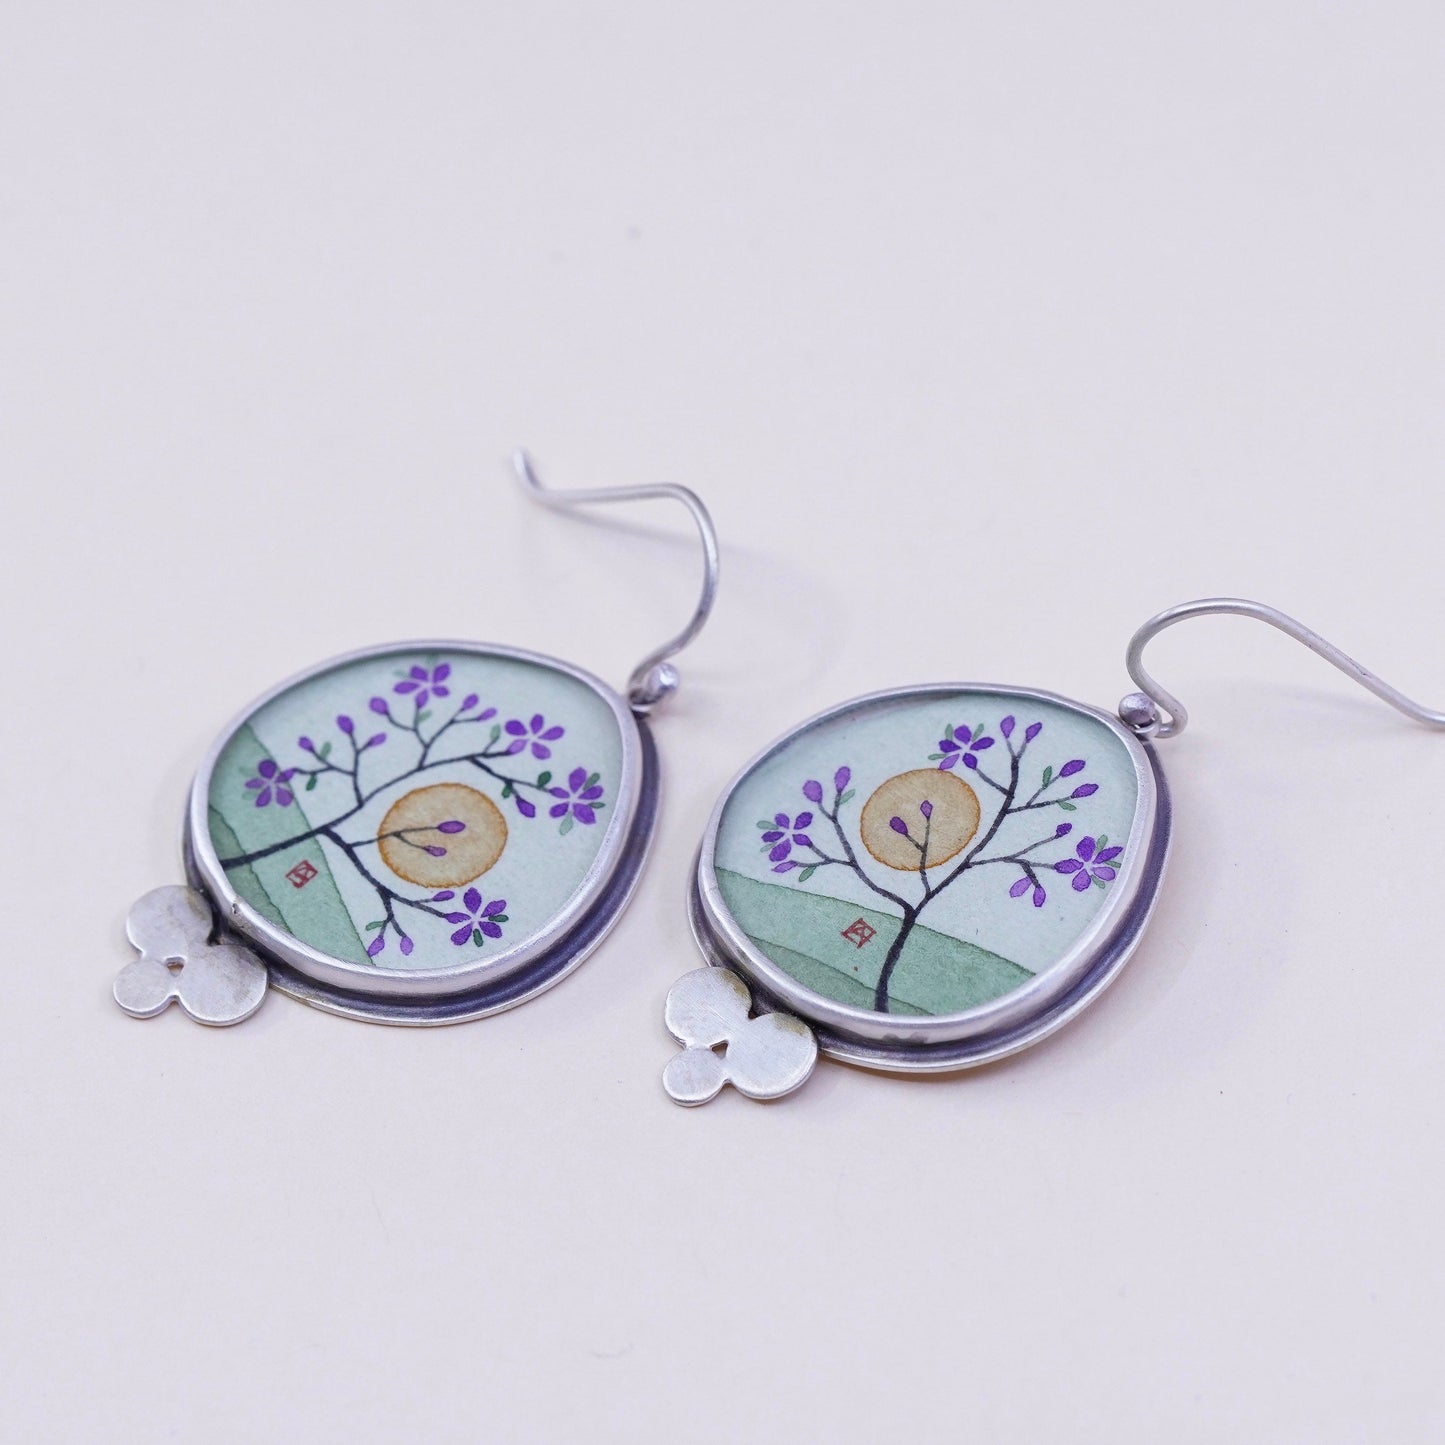 Designer Ananda KHALSA Sterling 925 silver handmade earrings, watercolor purple plum blossom flower with sun, stamped 925 A